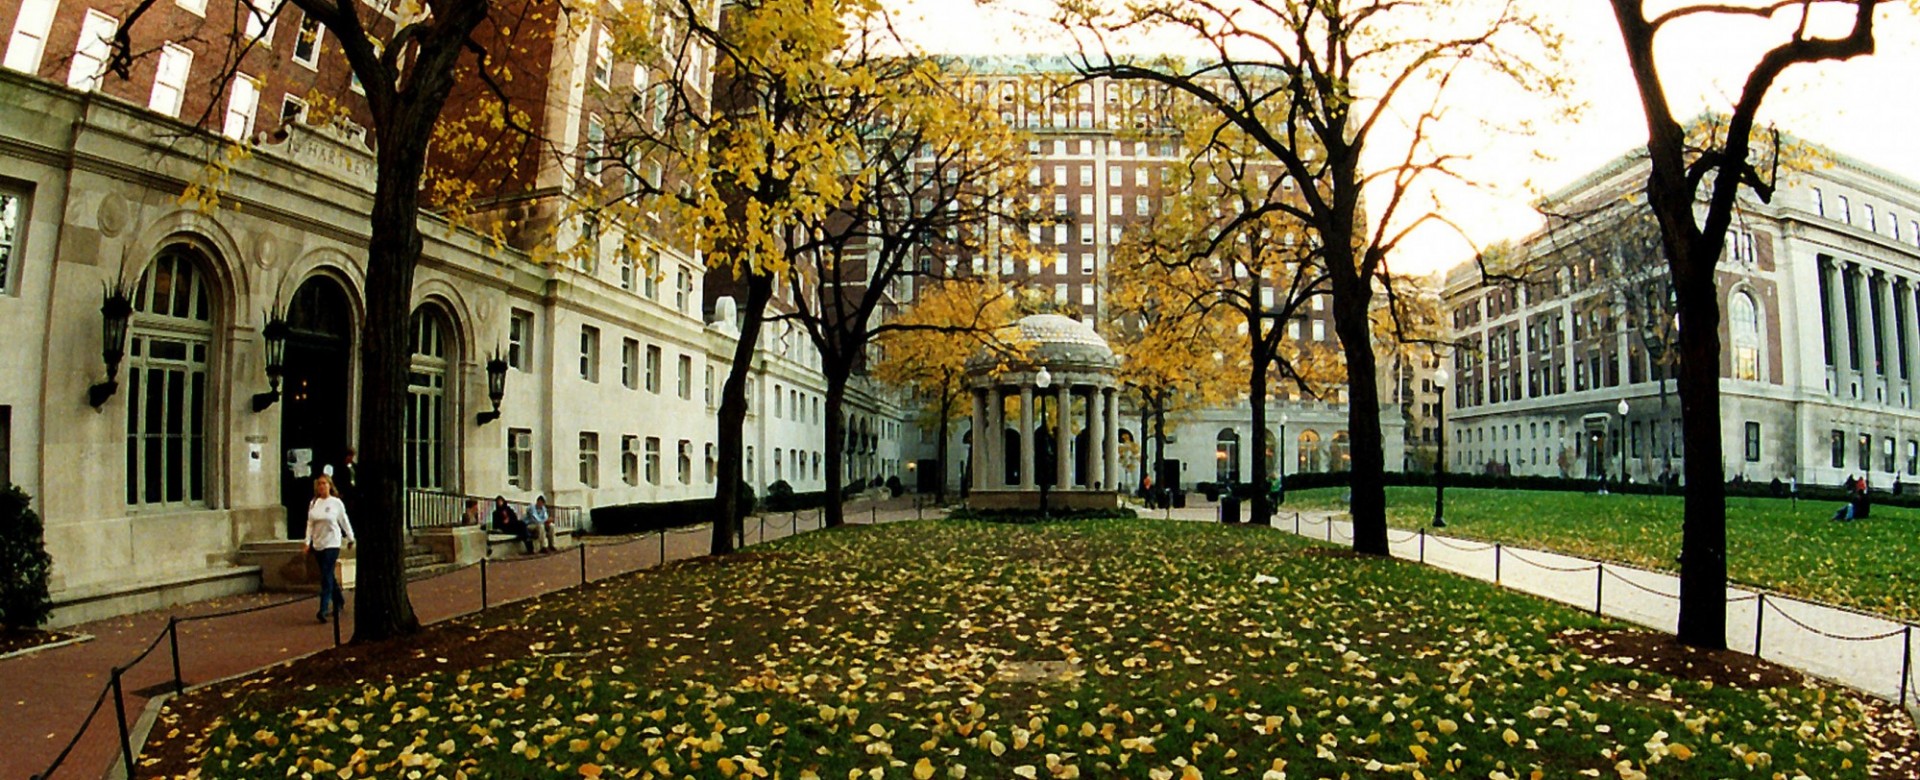 Hamilton Lawn and Van Amringe Memorial in Van Am Quad, picture of lawn with yellow leaves